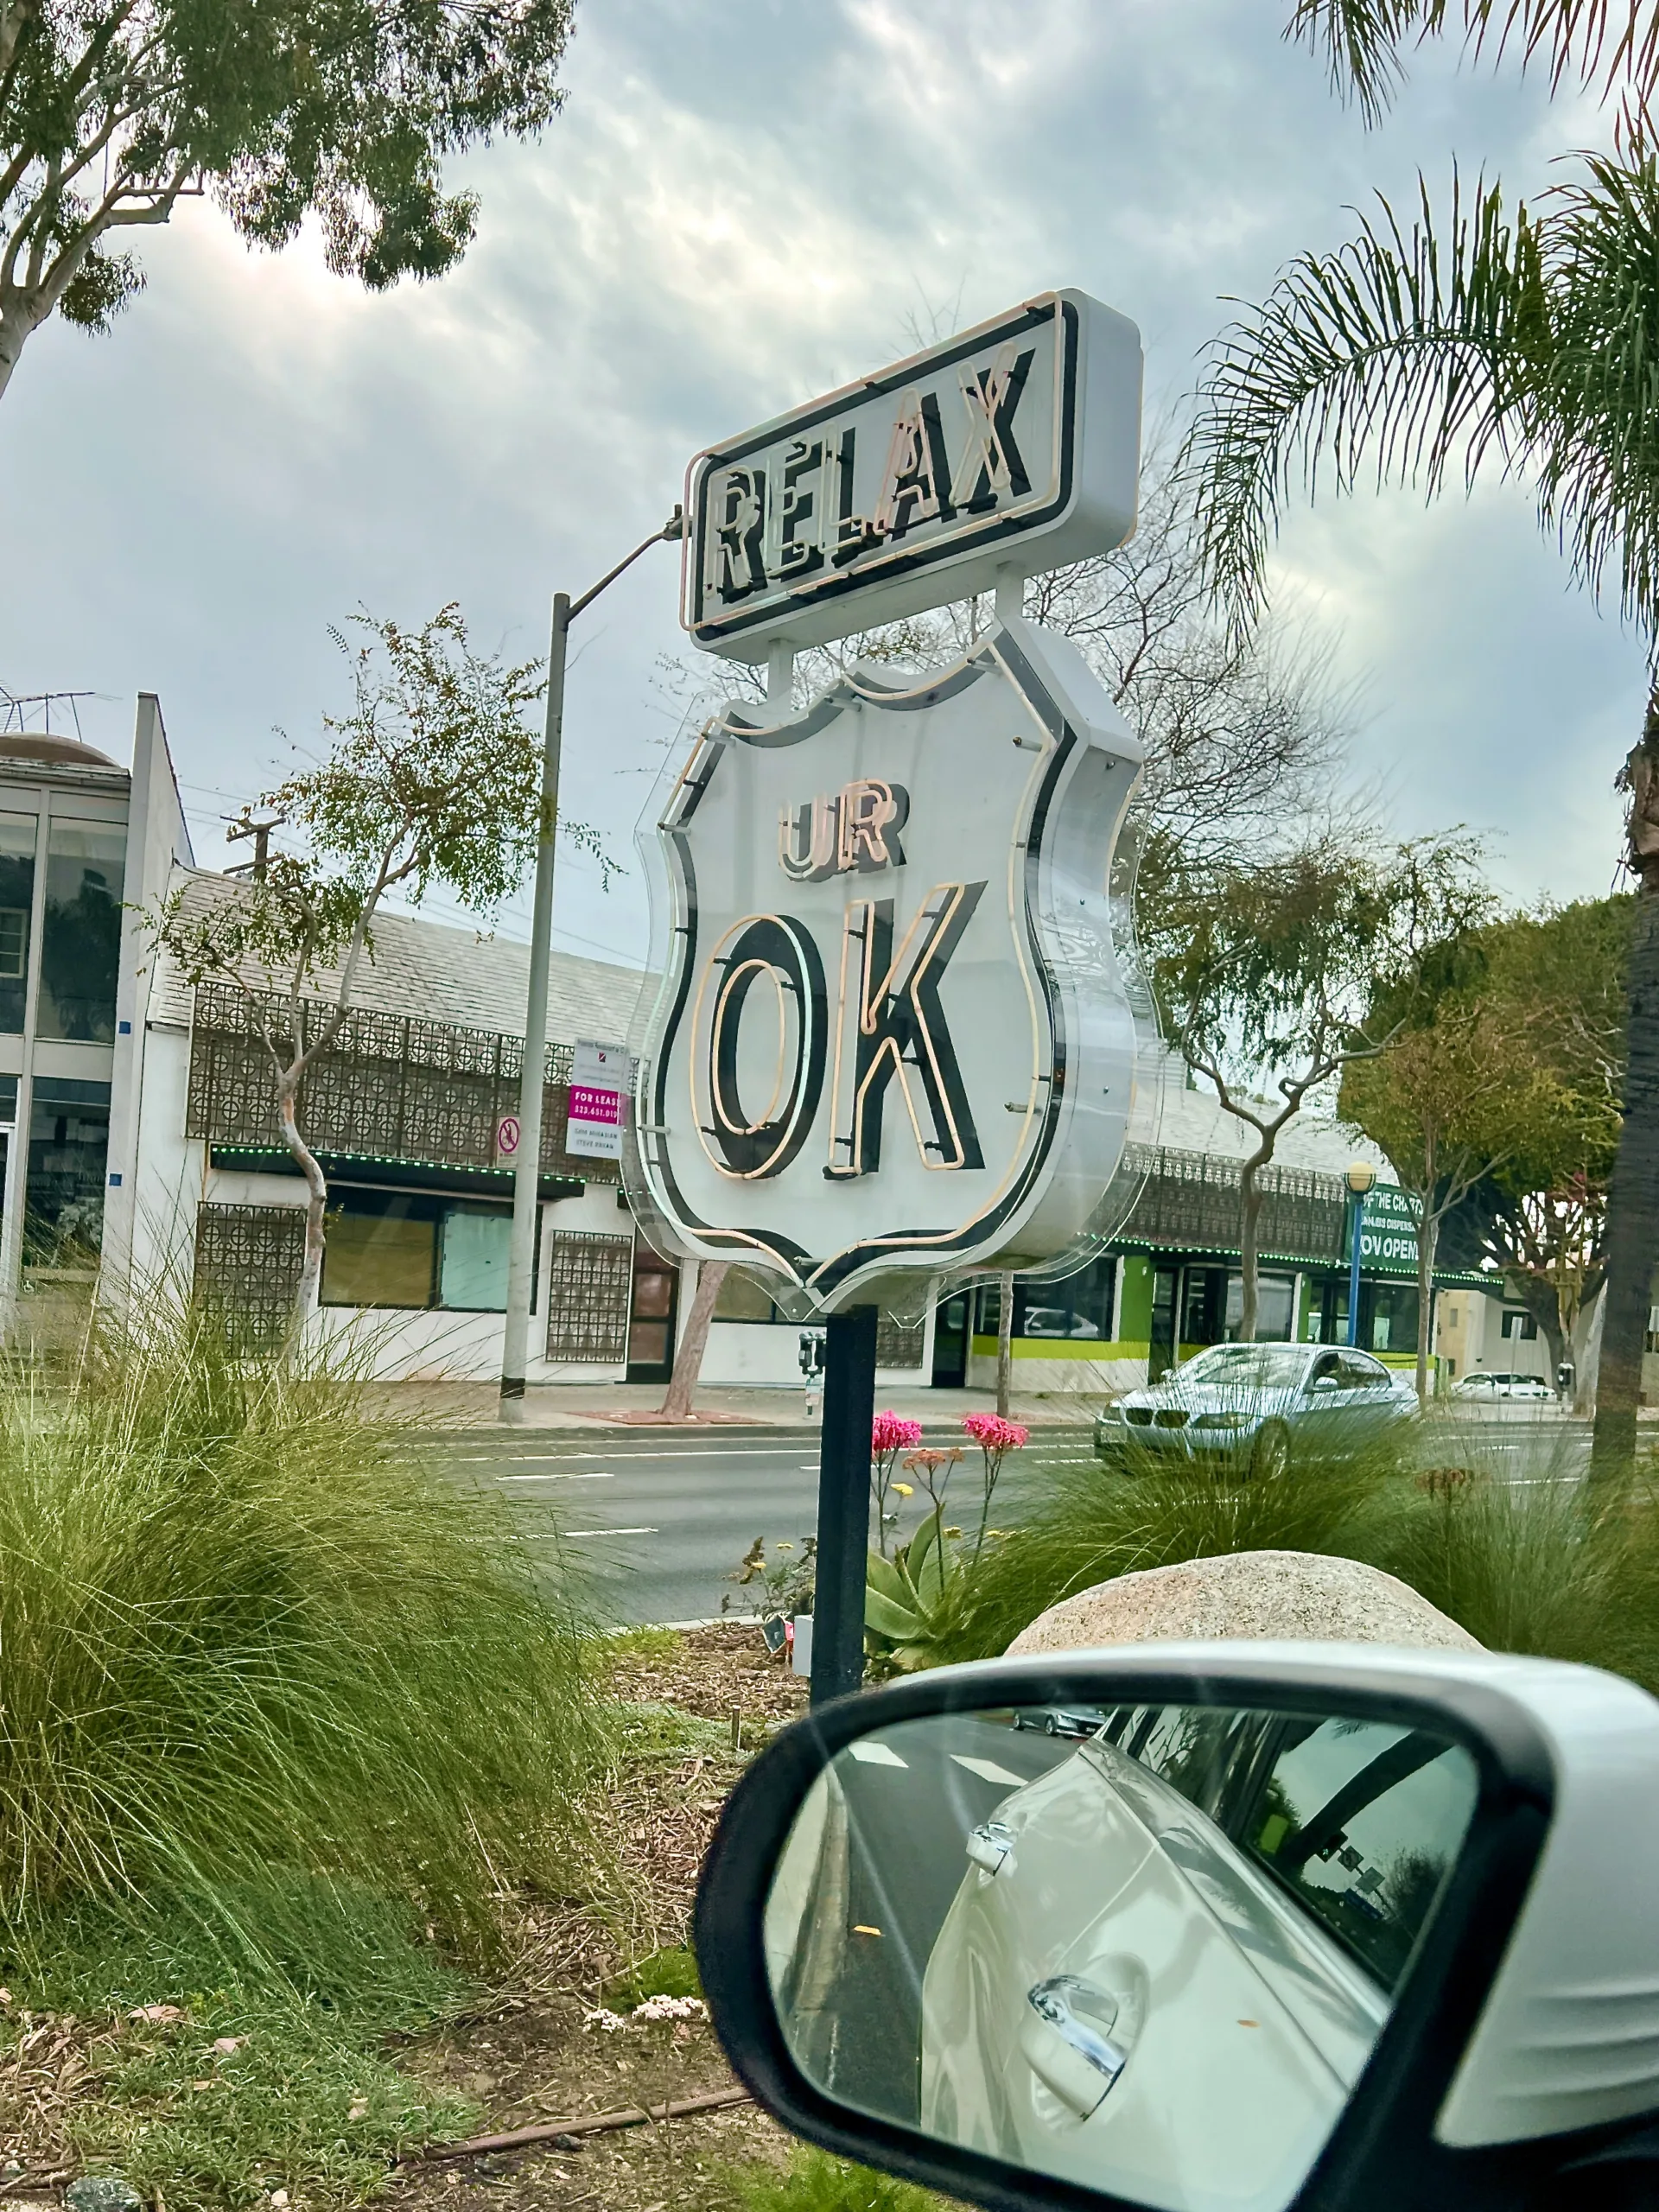 Relax It'll Be OK sign